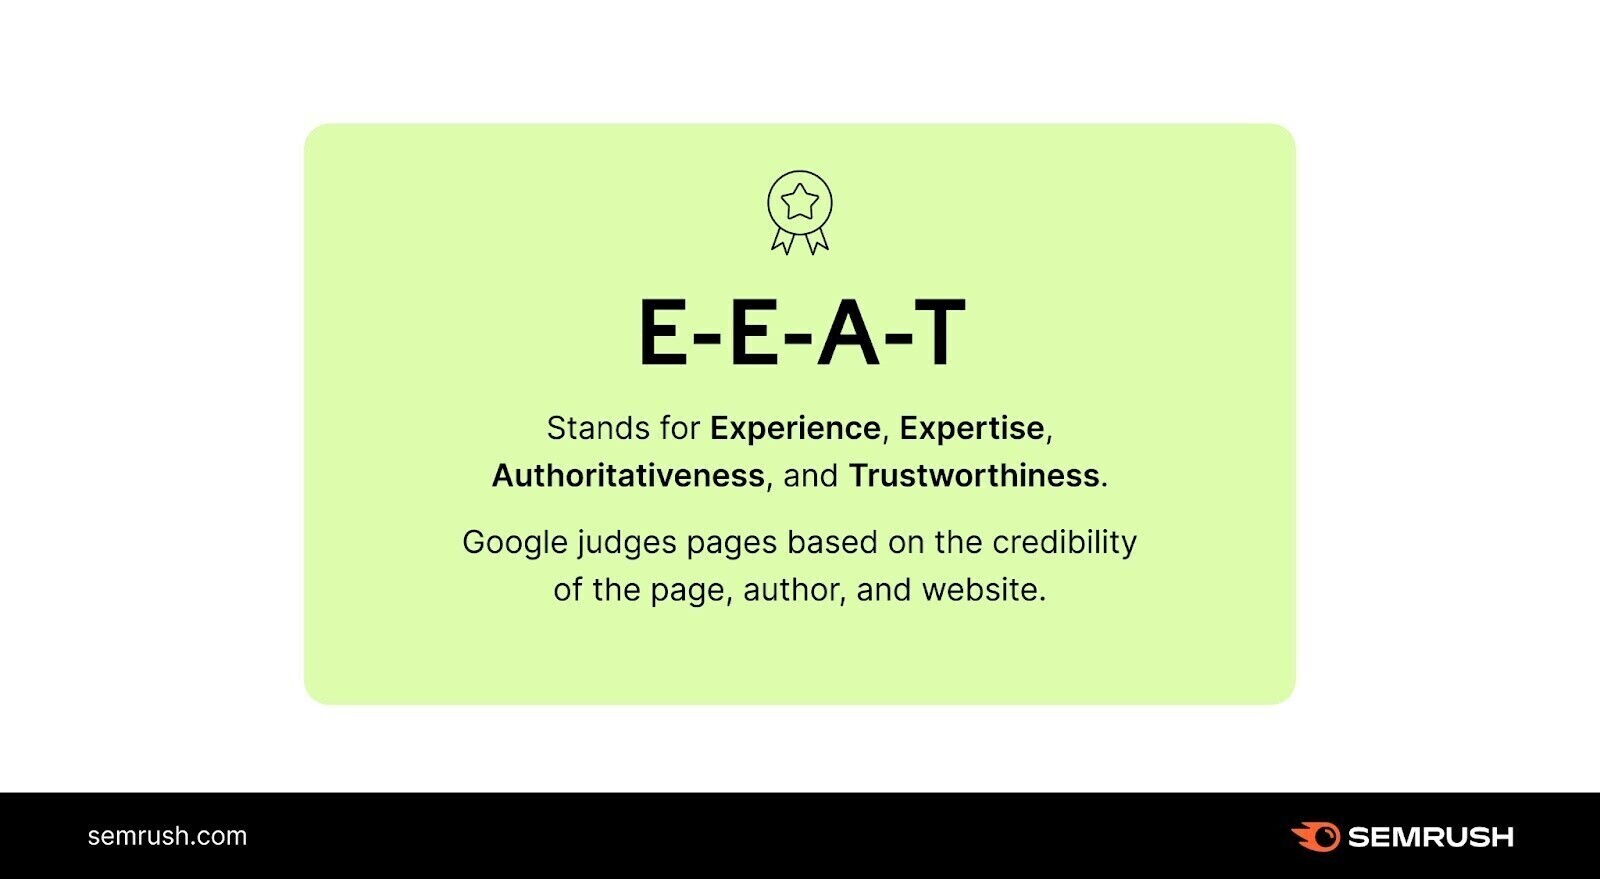 A visual explaining what E-E-A-T stands for